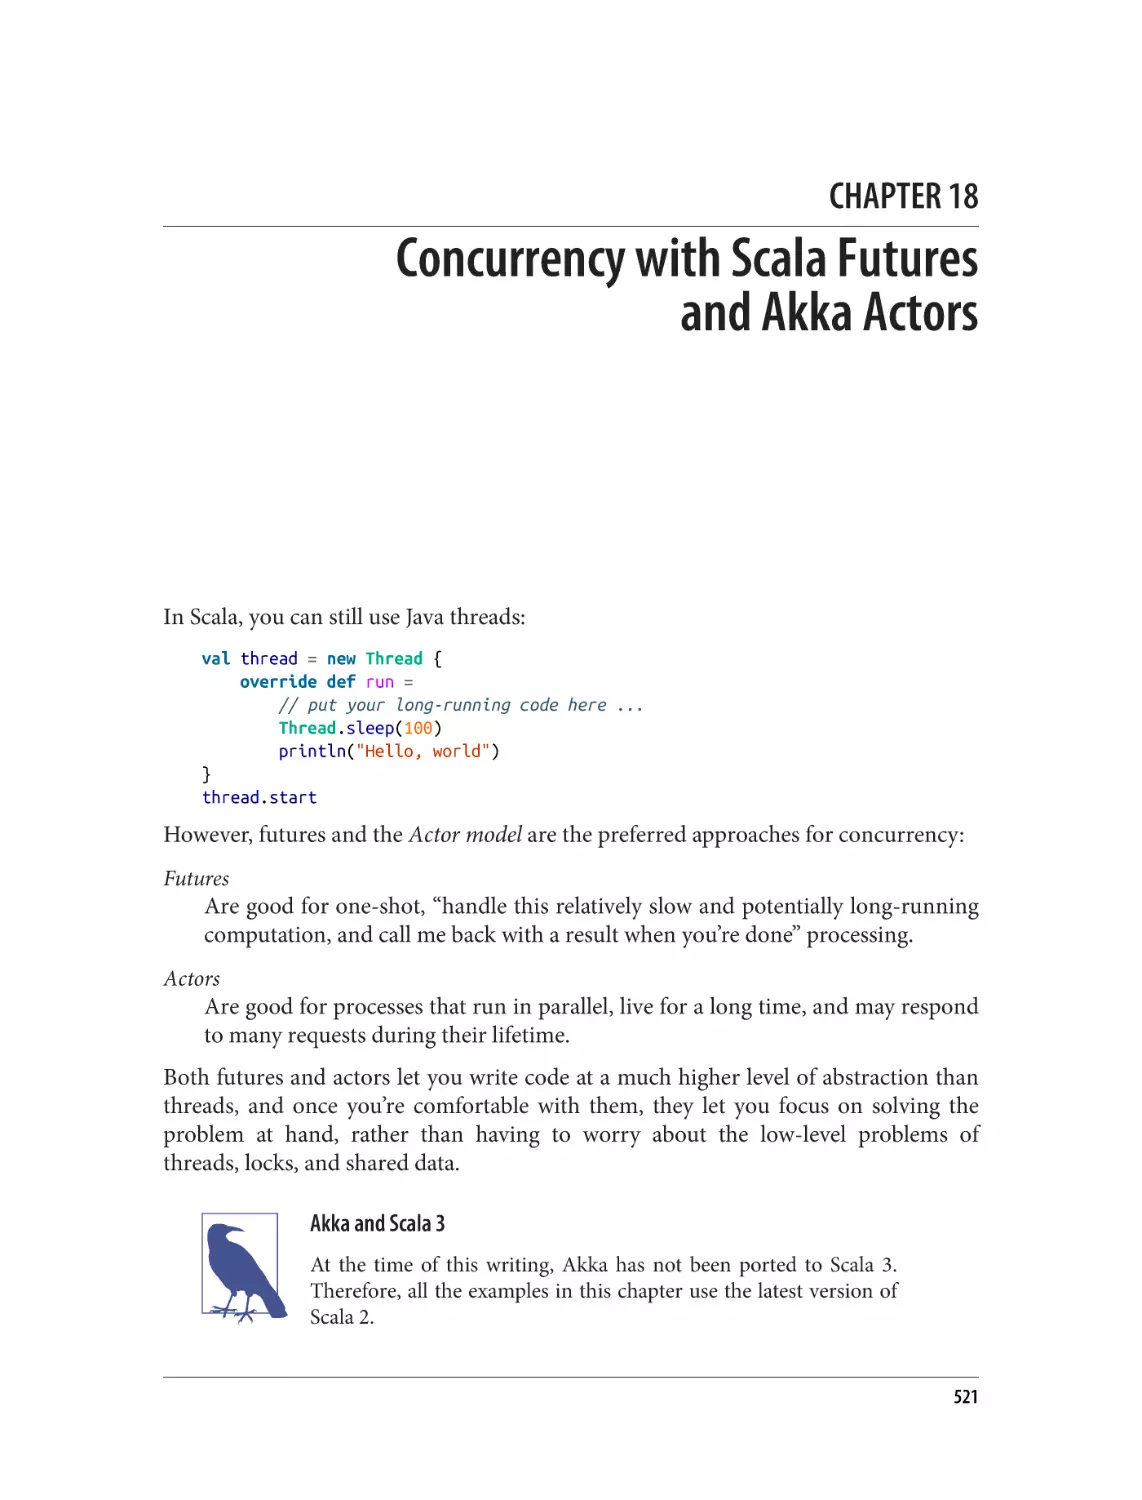 Chapter 18. Concurrency with Scala Futures and Akka Actors